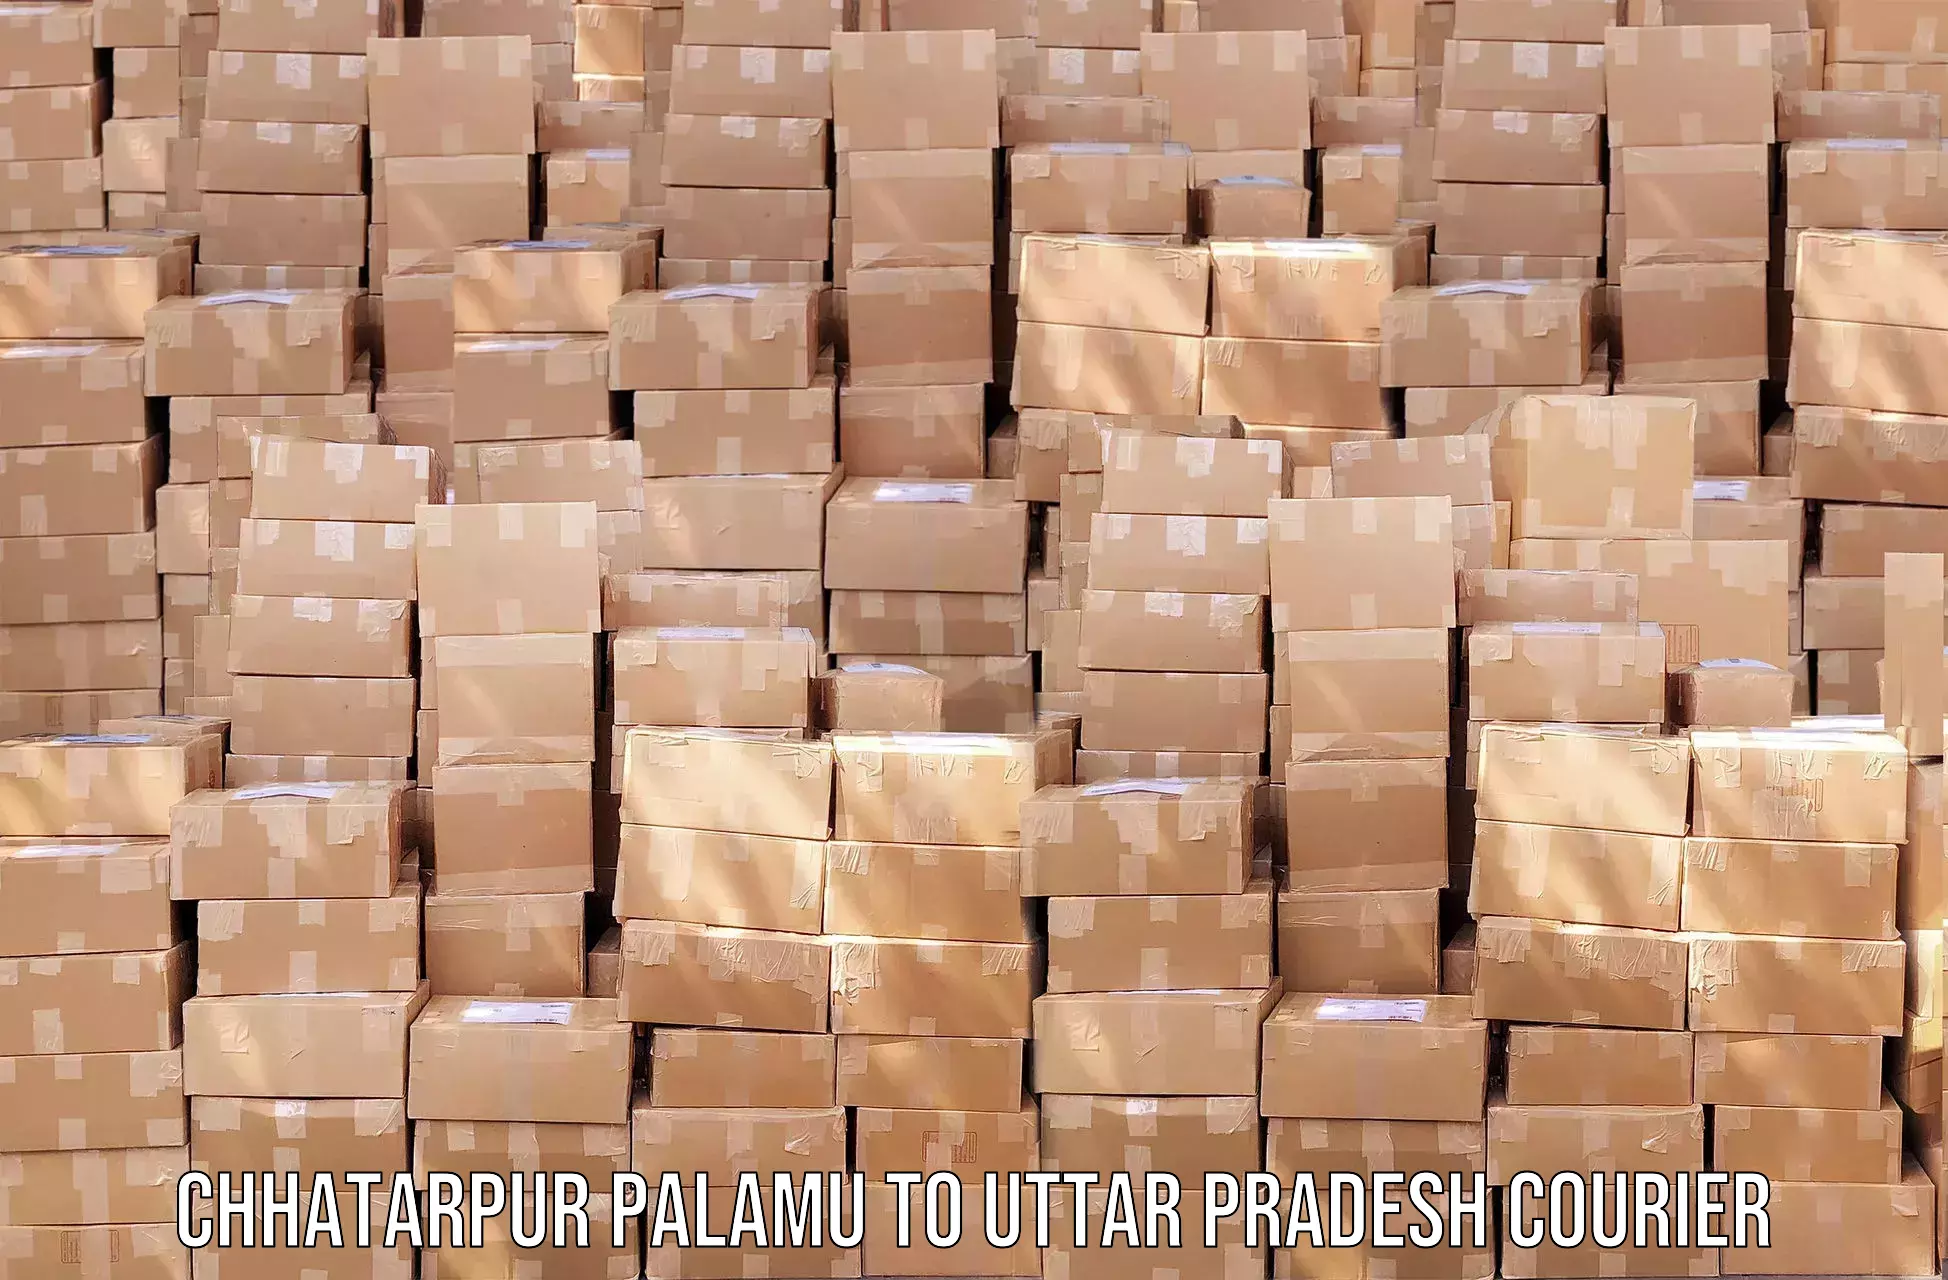 Parcel delivery automation Chhatarpur Palamu to Shahjahanpur